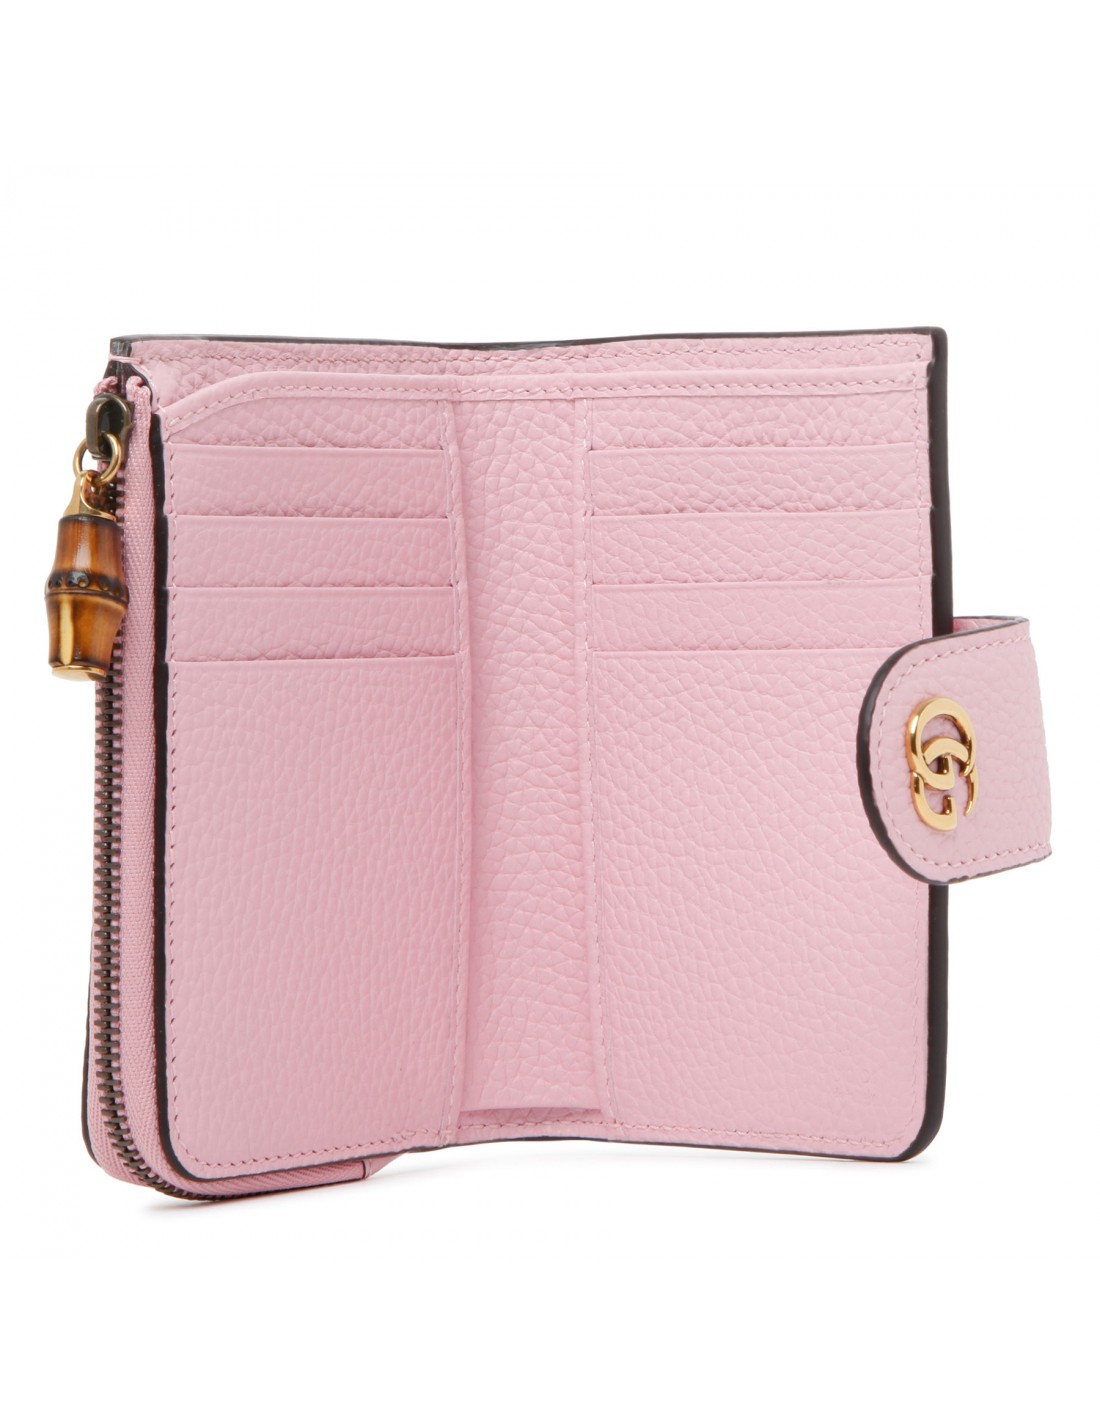 Double G pink medium wallet with bamboo